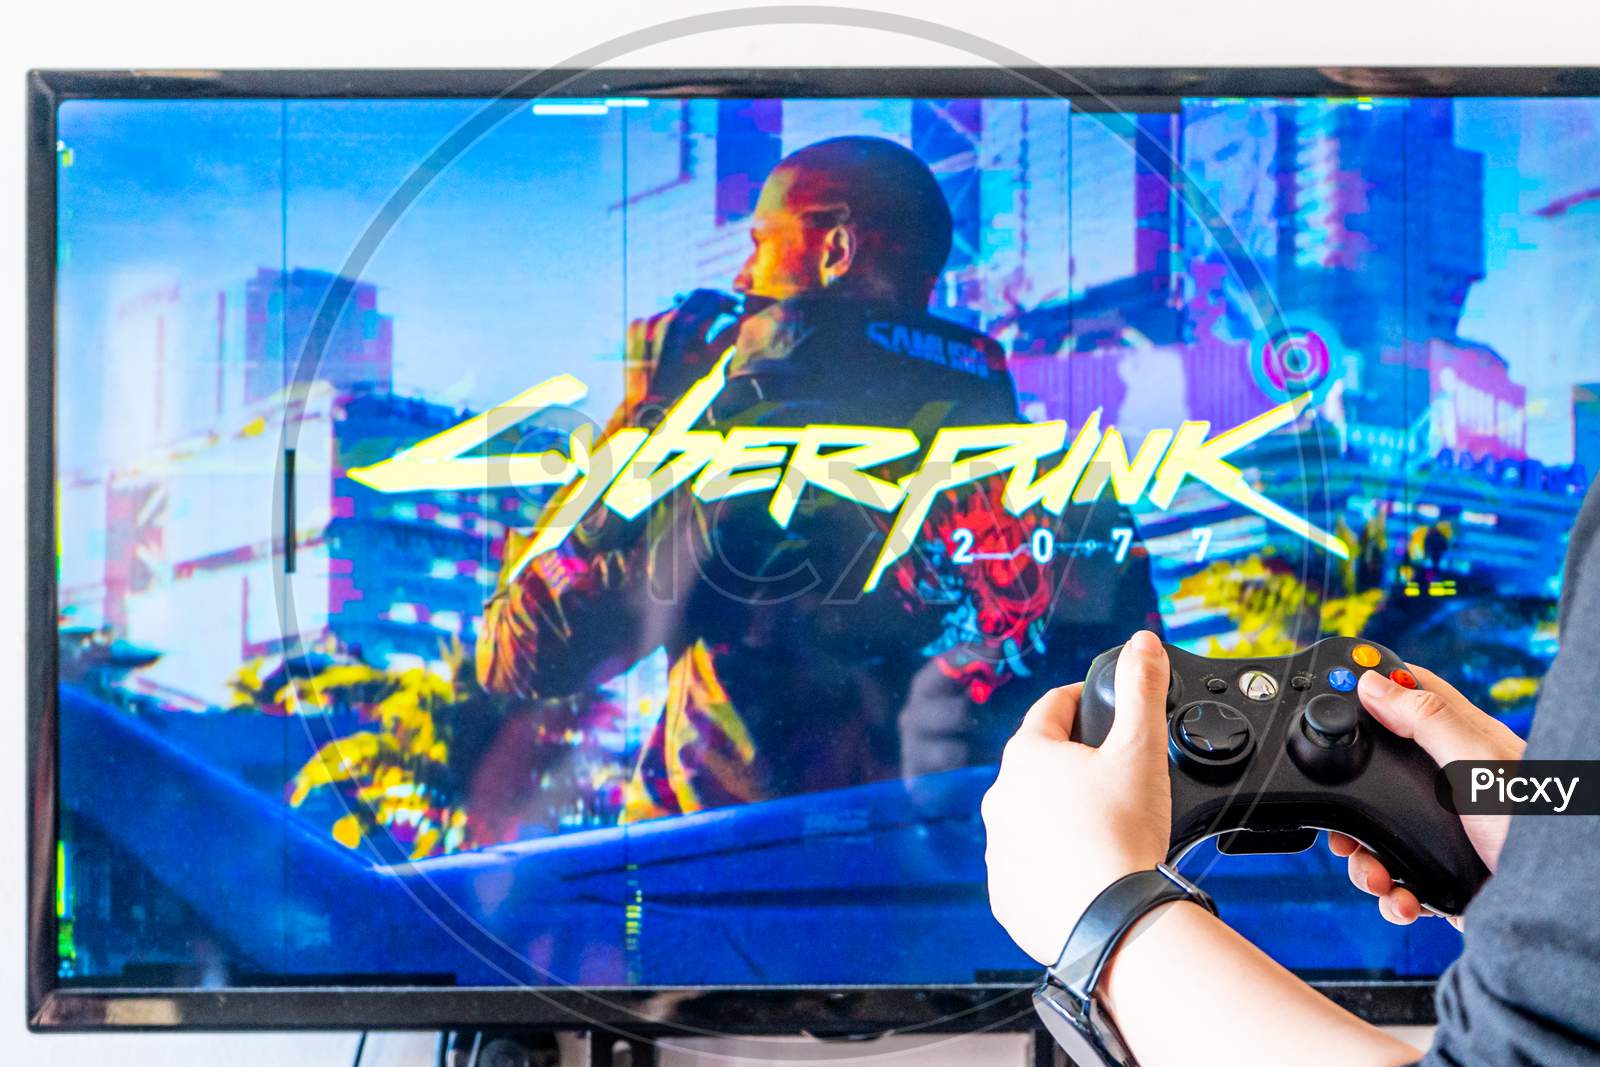 Woman Holding A Xbox Controller And Playing Popular Video Game Cyberpunk 2077 On A Television And Pc